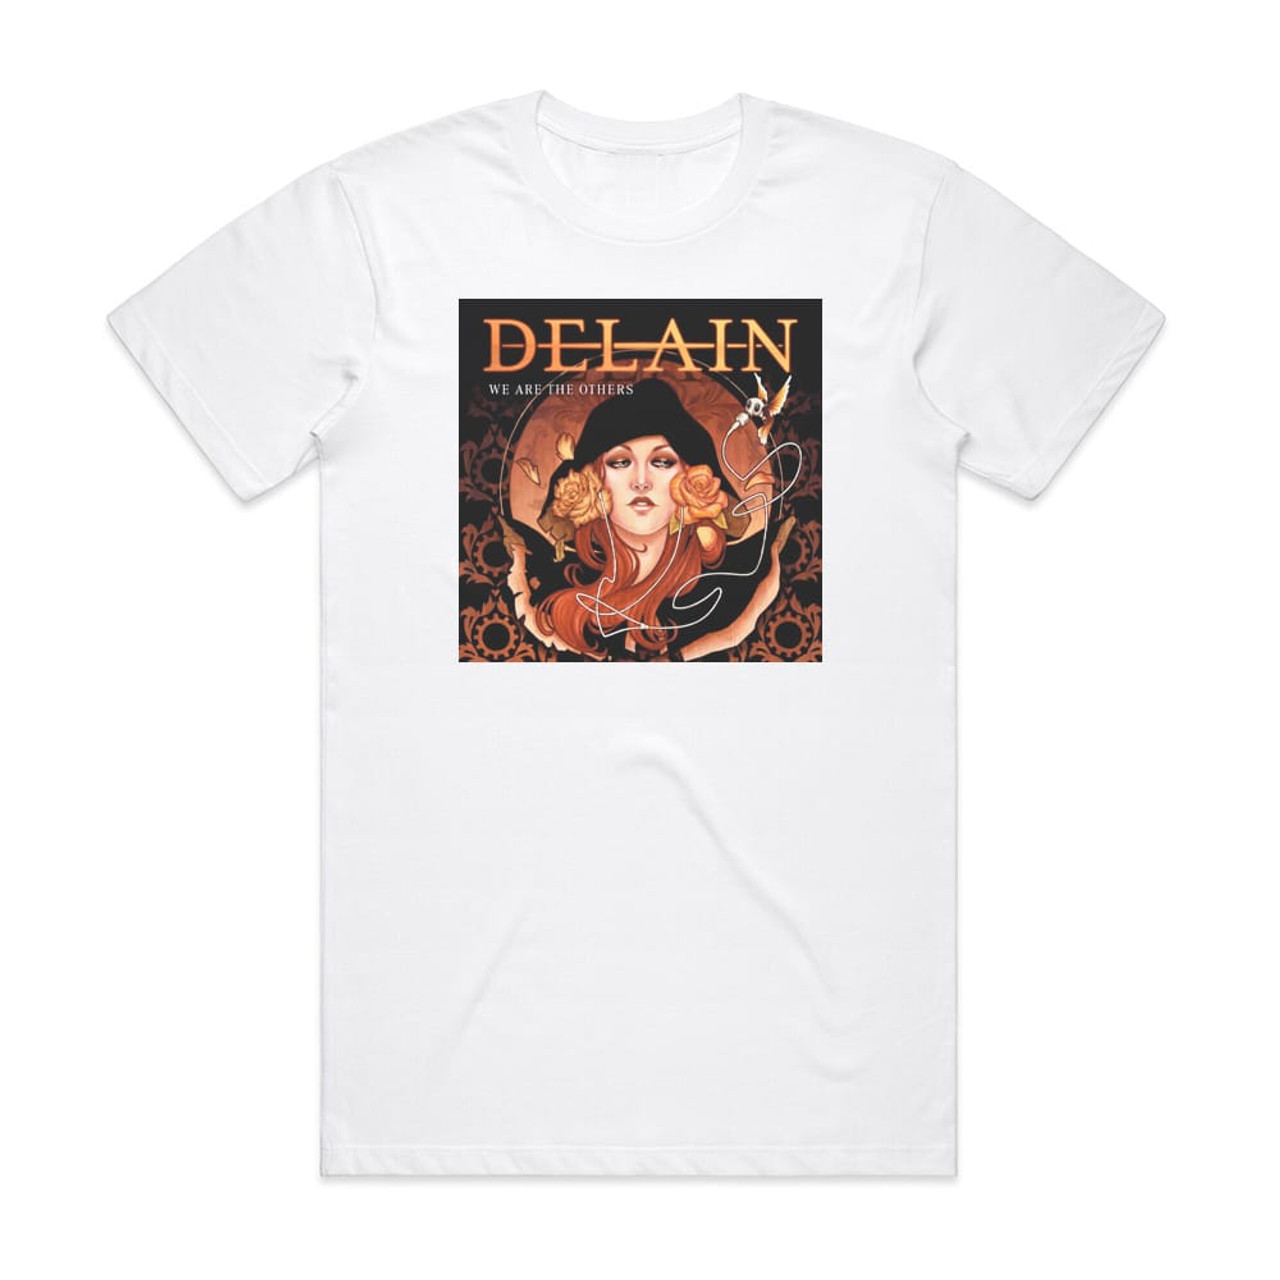 Delain We Are The Others Album Cover T-Shirt White